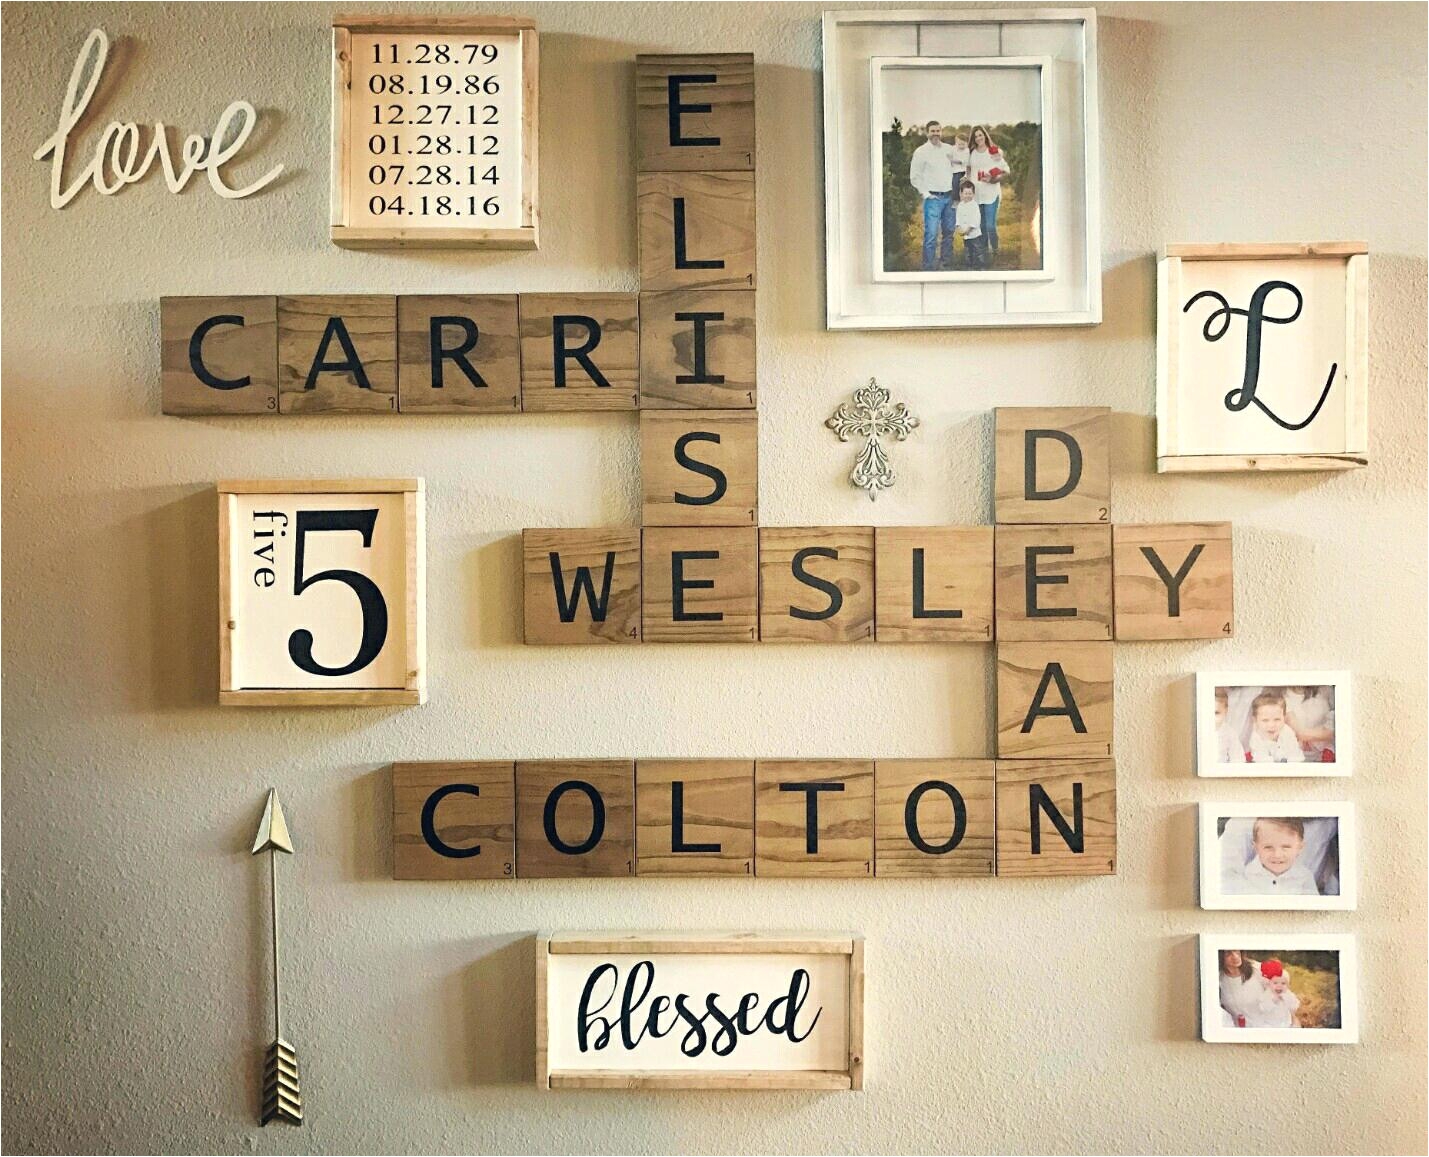 Large Metal Letters for Decorating Wall Decor Alphabet Decorative Letters Alphabet Letters for Wall